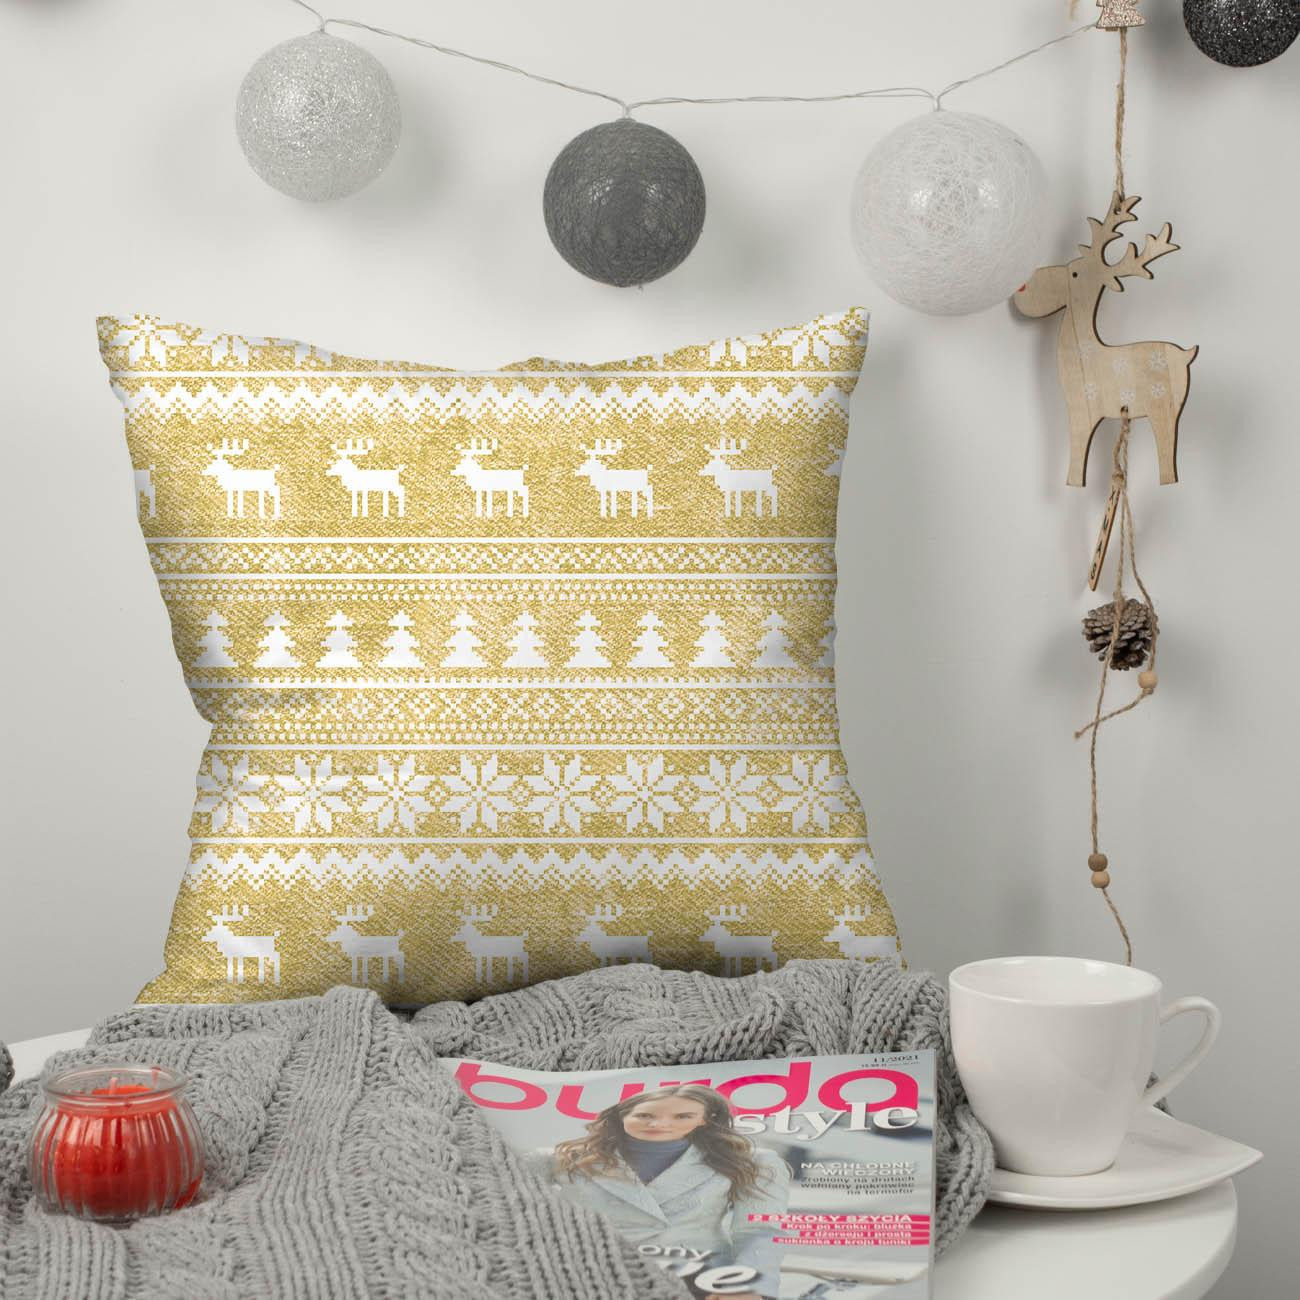 REINDEERS PAT. 2 / ACID WASH GOLD  - Cotton woven fabric